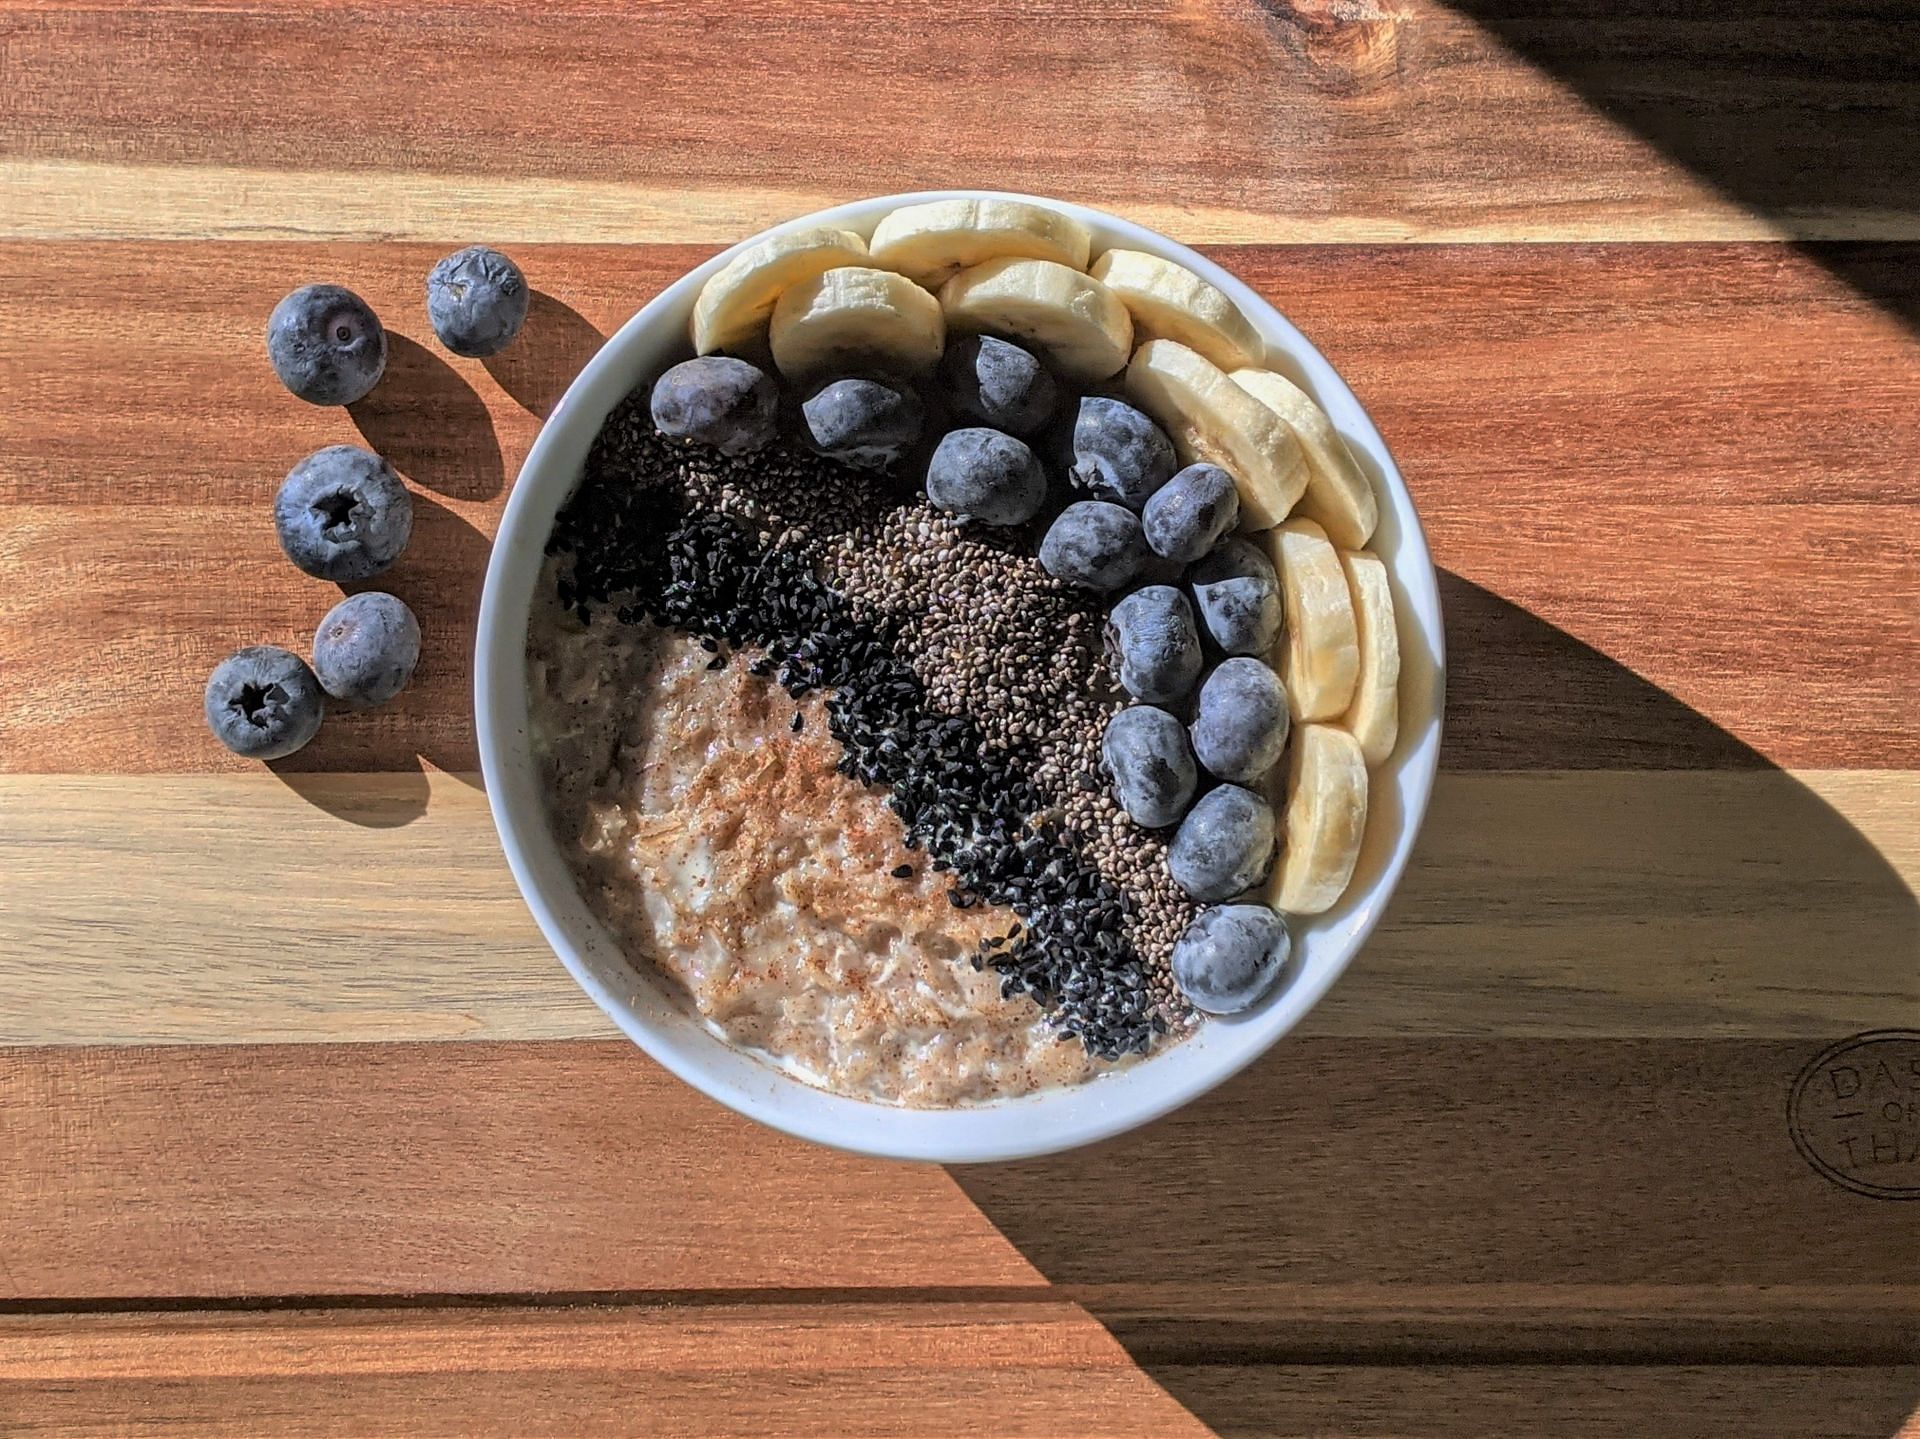 Oatmeal topped with berries and seeds. (Image via Unsplash/ Susan Wilkinson)